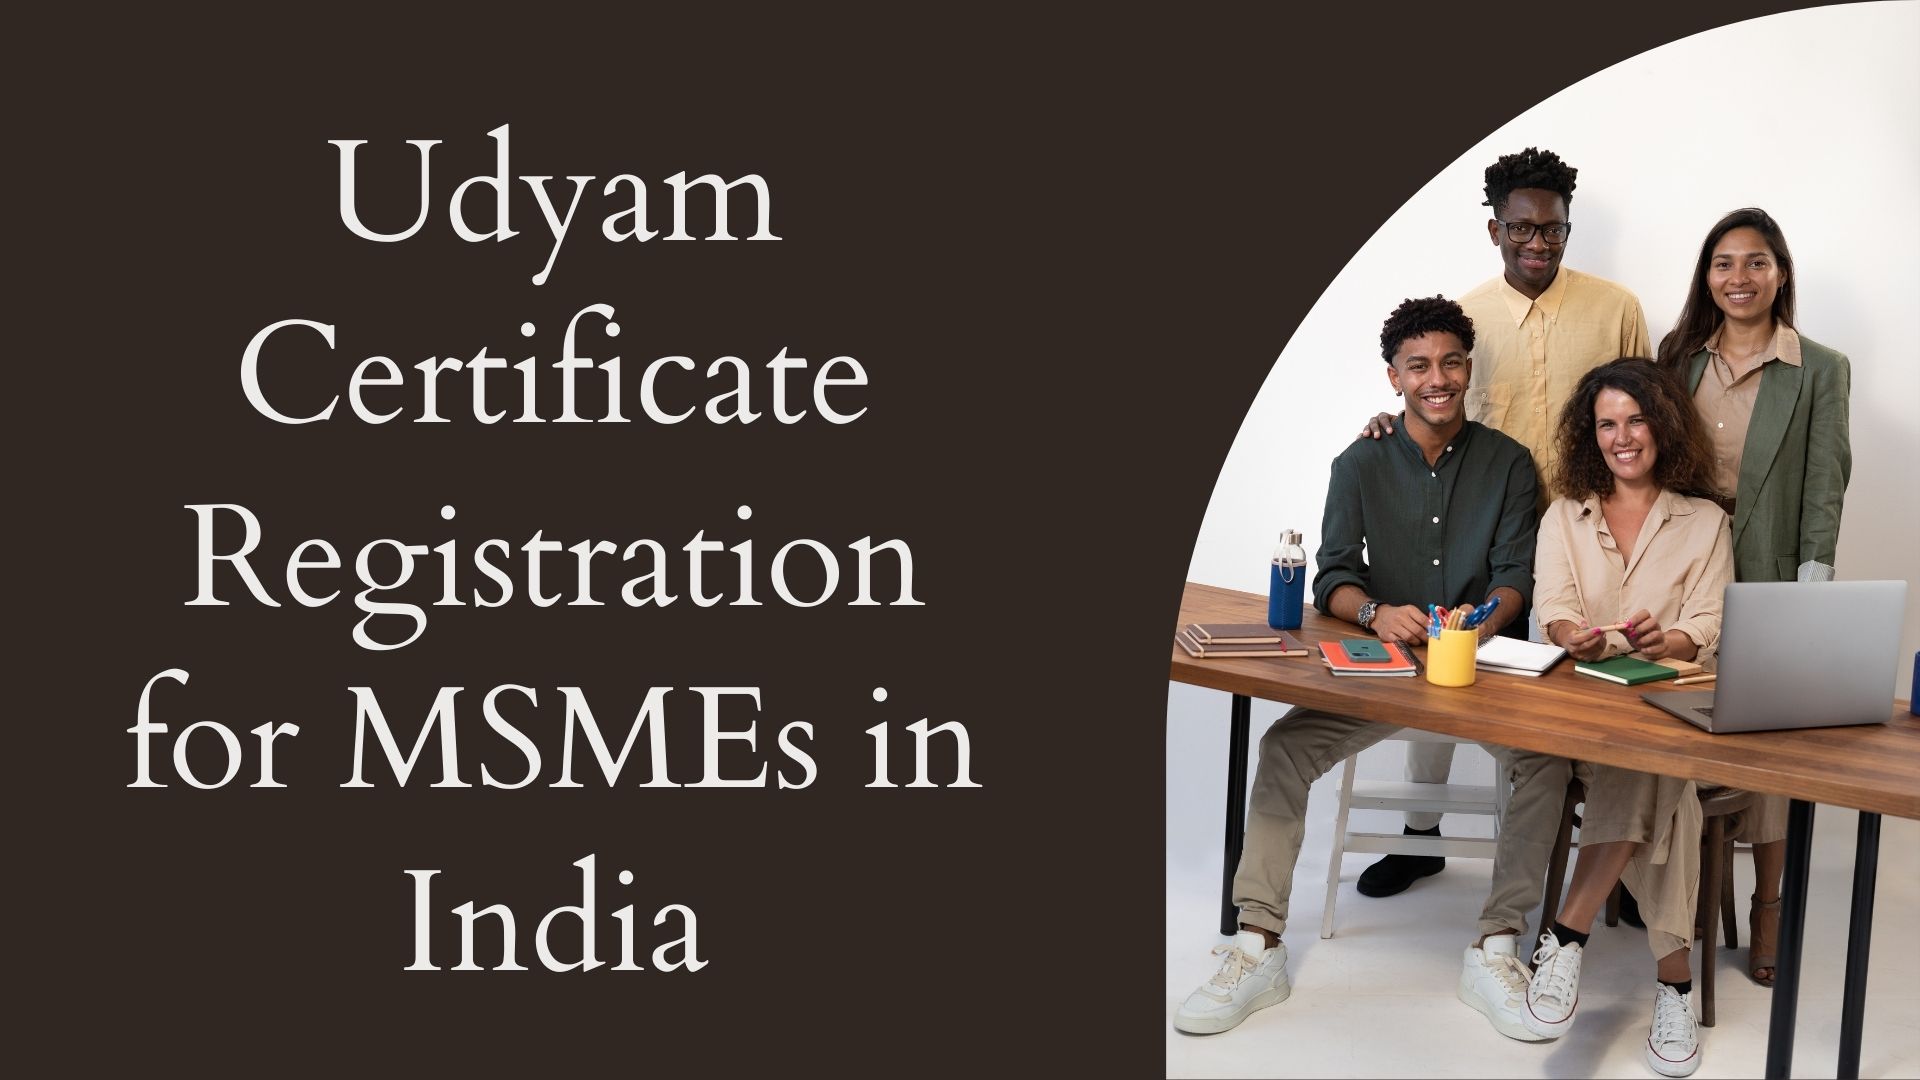 Udyam Certificate Registration for MSMEs in India